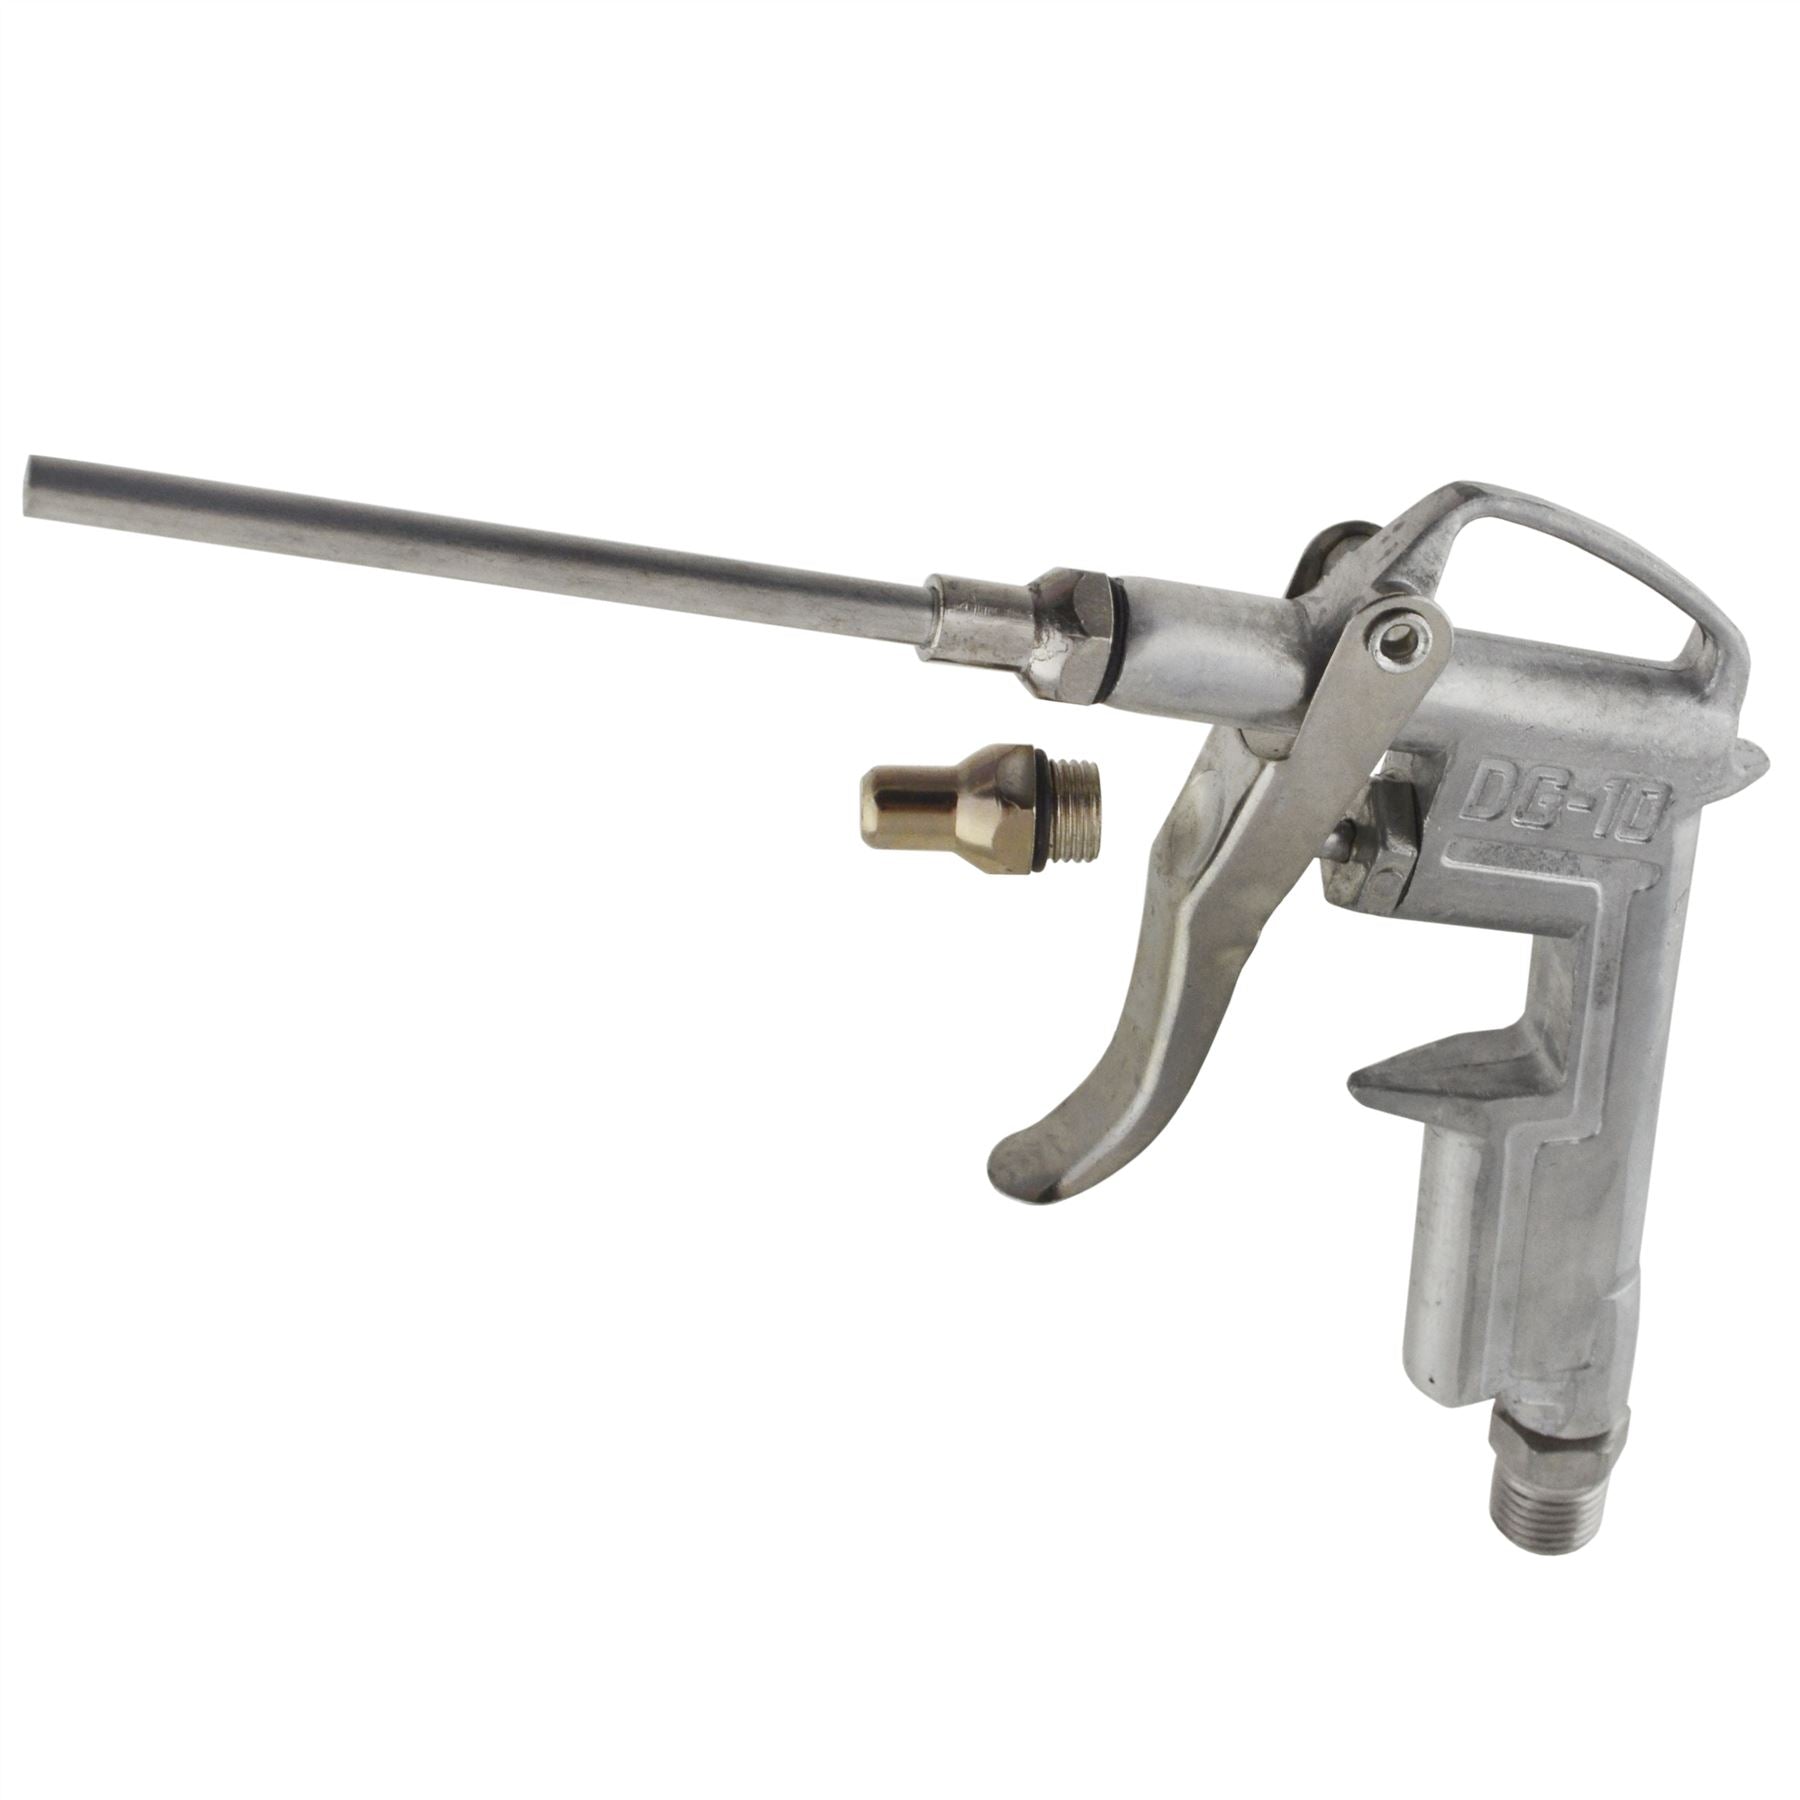 Air Blow / Dust / Blower Gun with Short Nozzle (5mm & 75mm) by BERGEN AT488